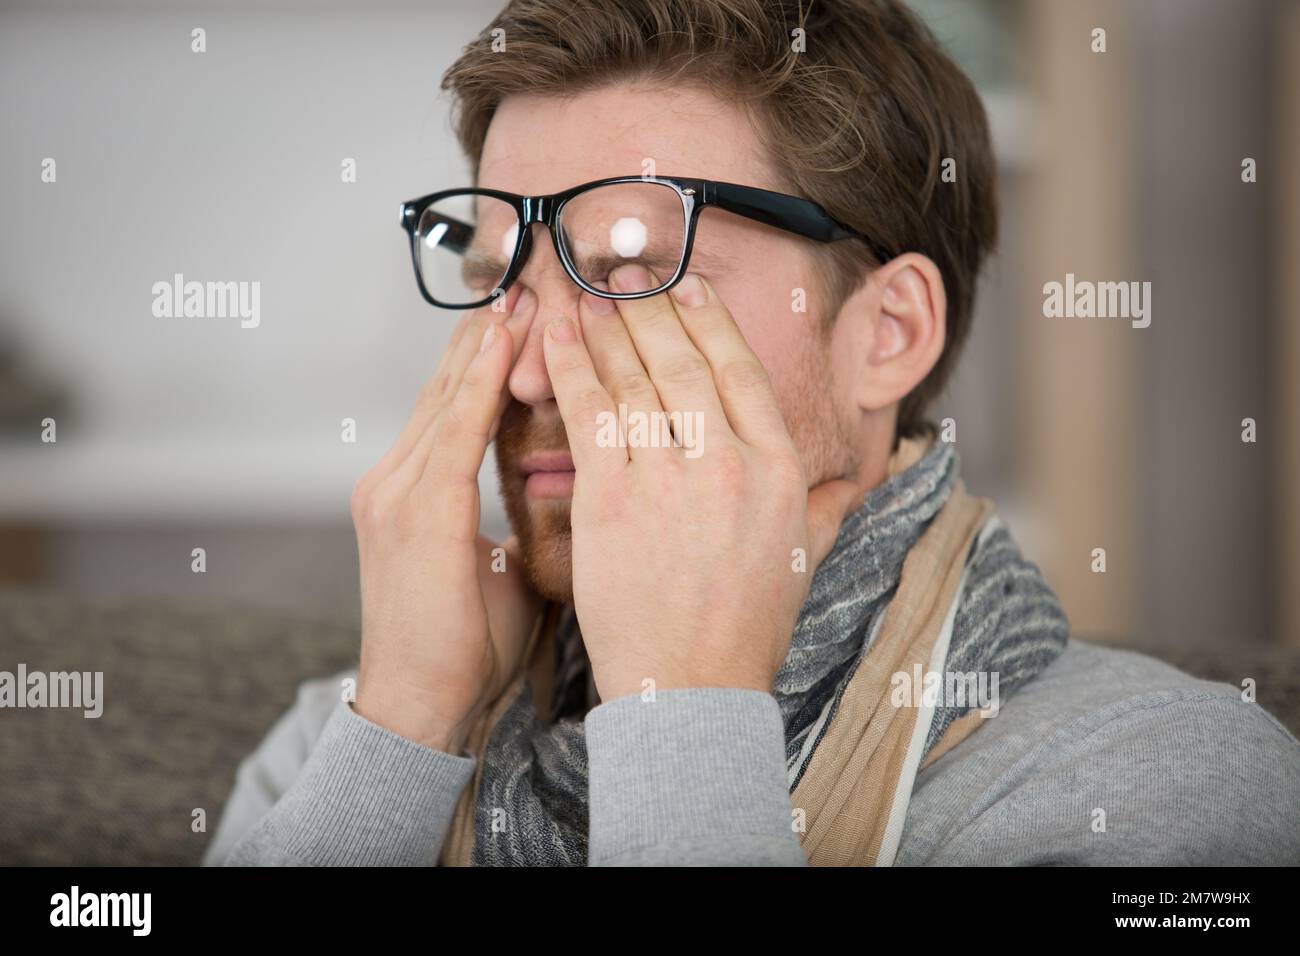 a man rubbing eye at home annoying itch Stock Photo